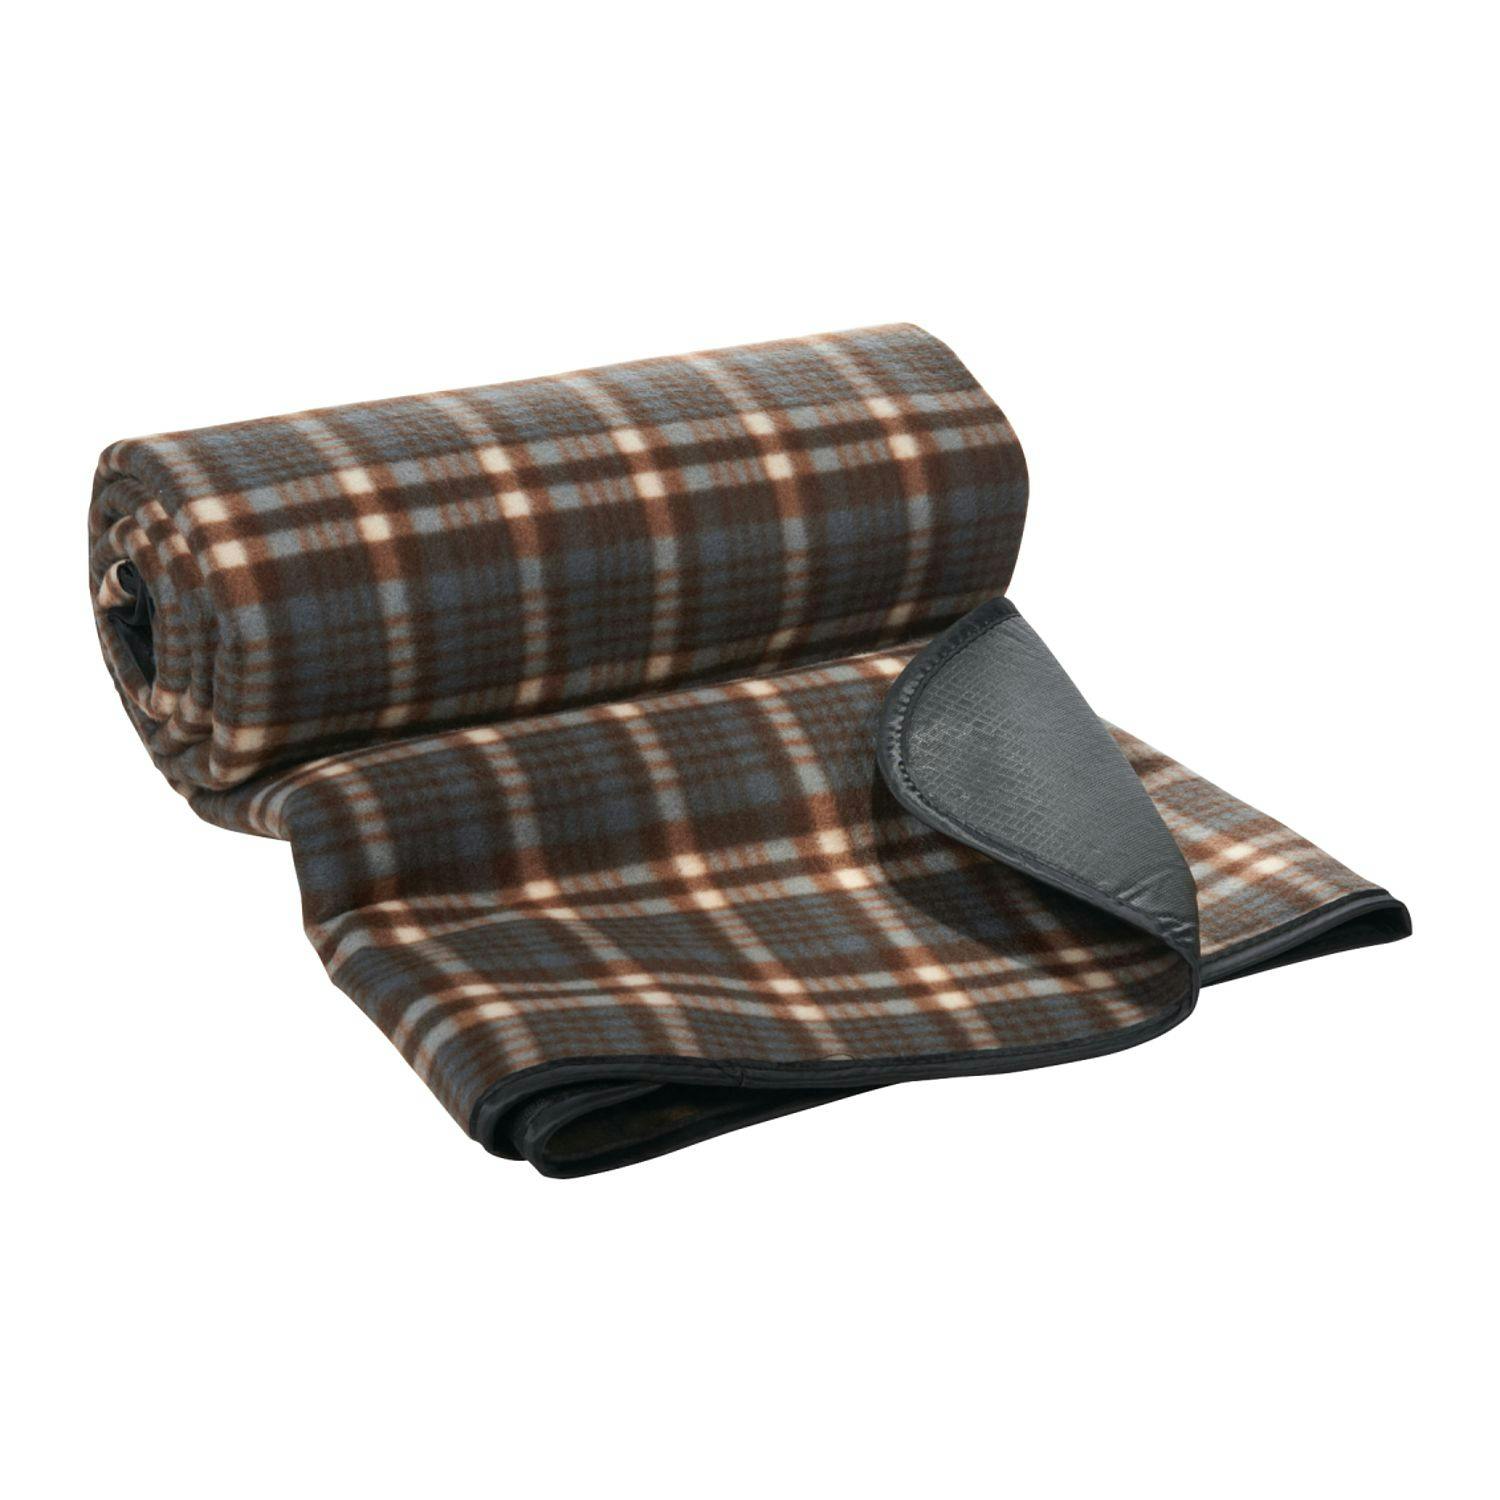 Field & Co.® Picnic Blanket - additional Image 2